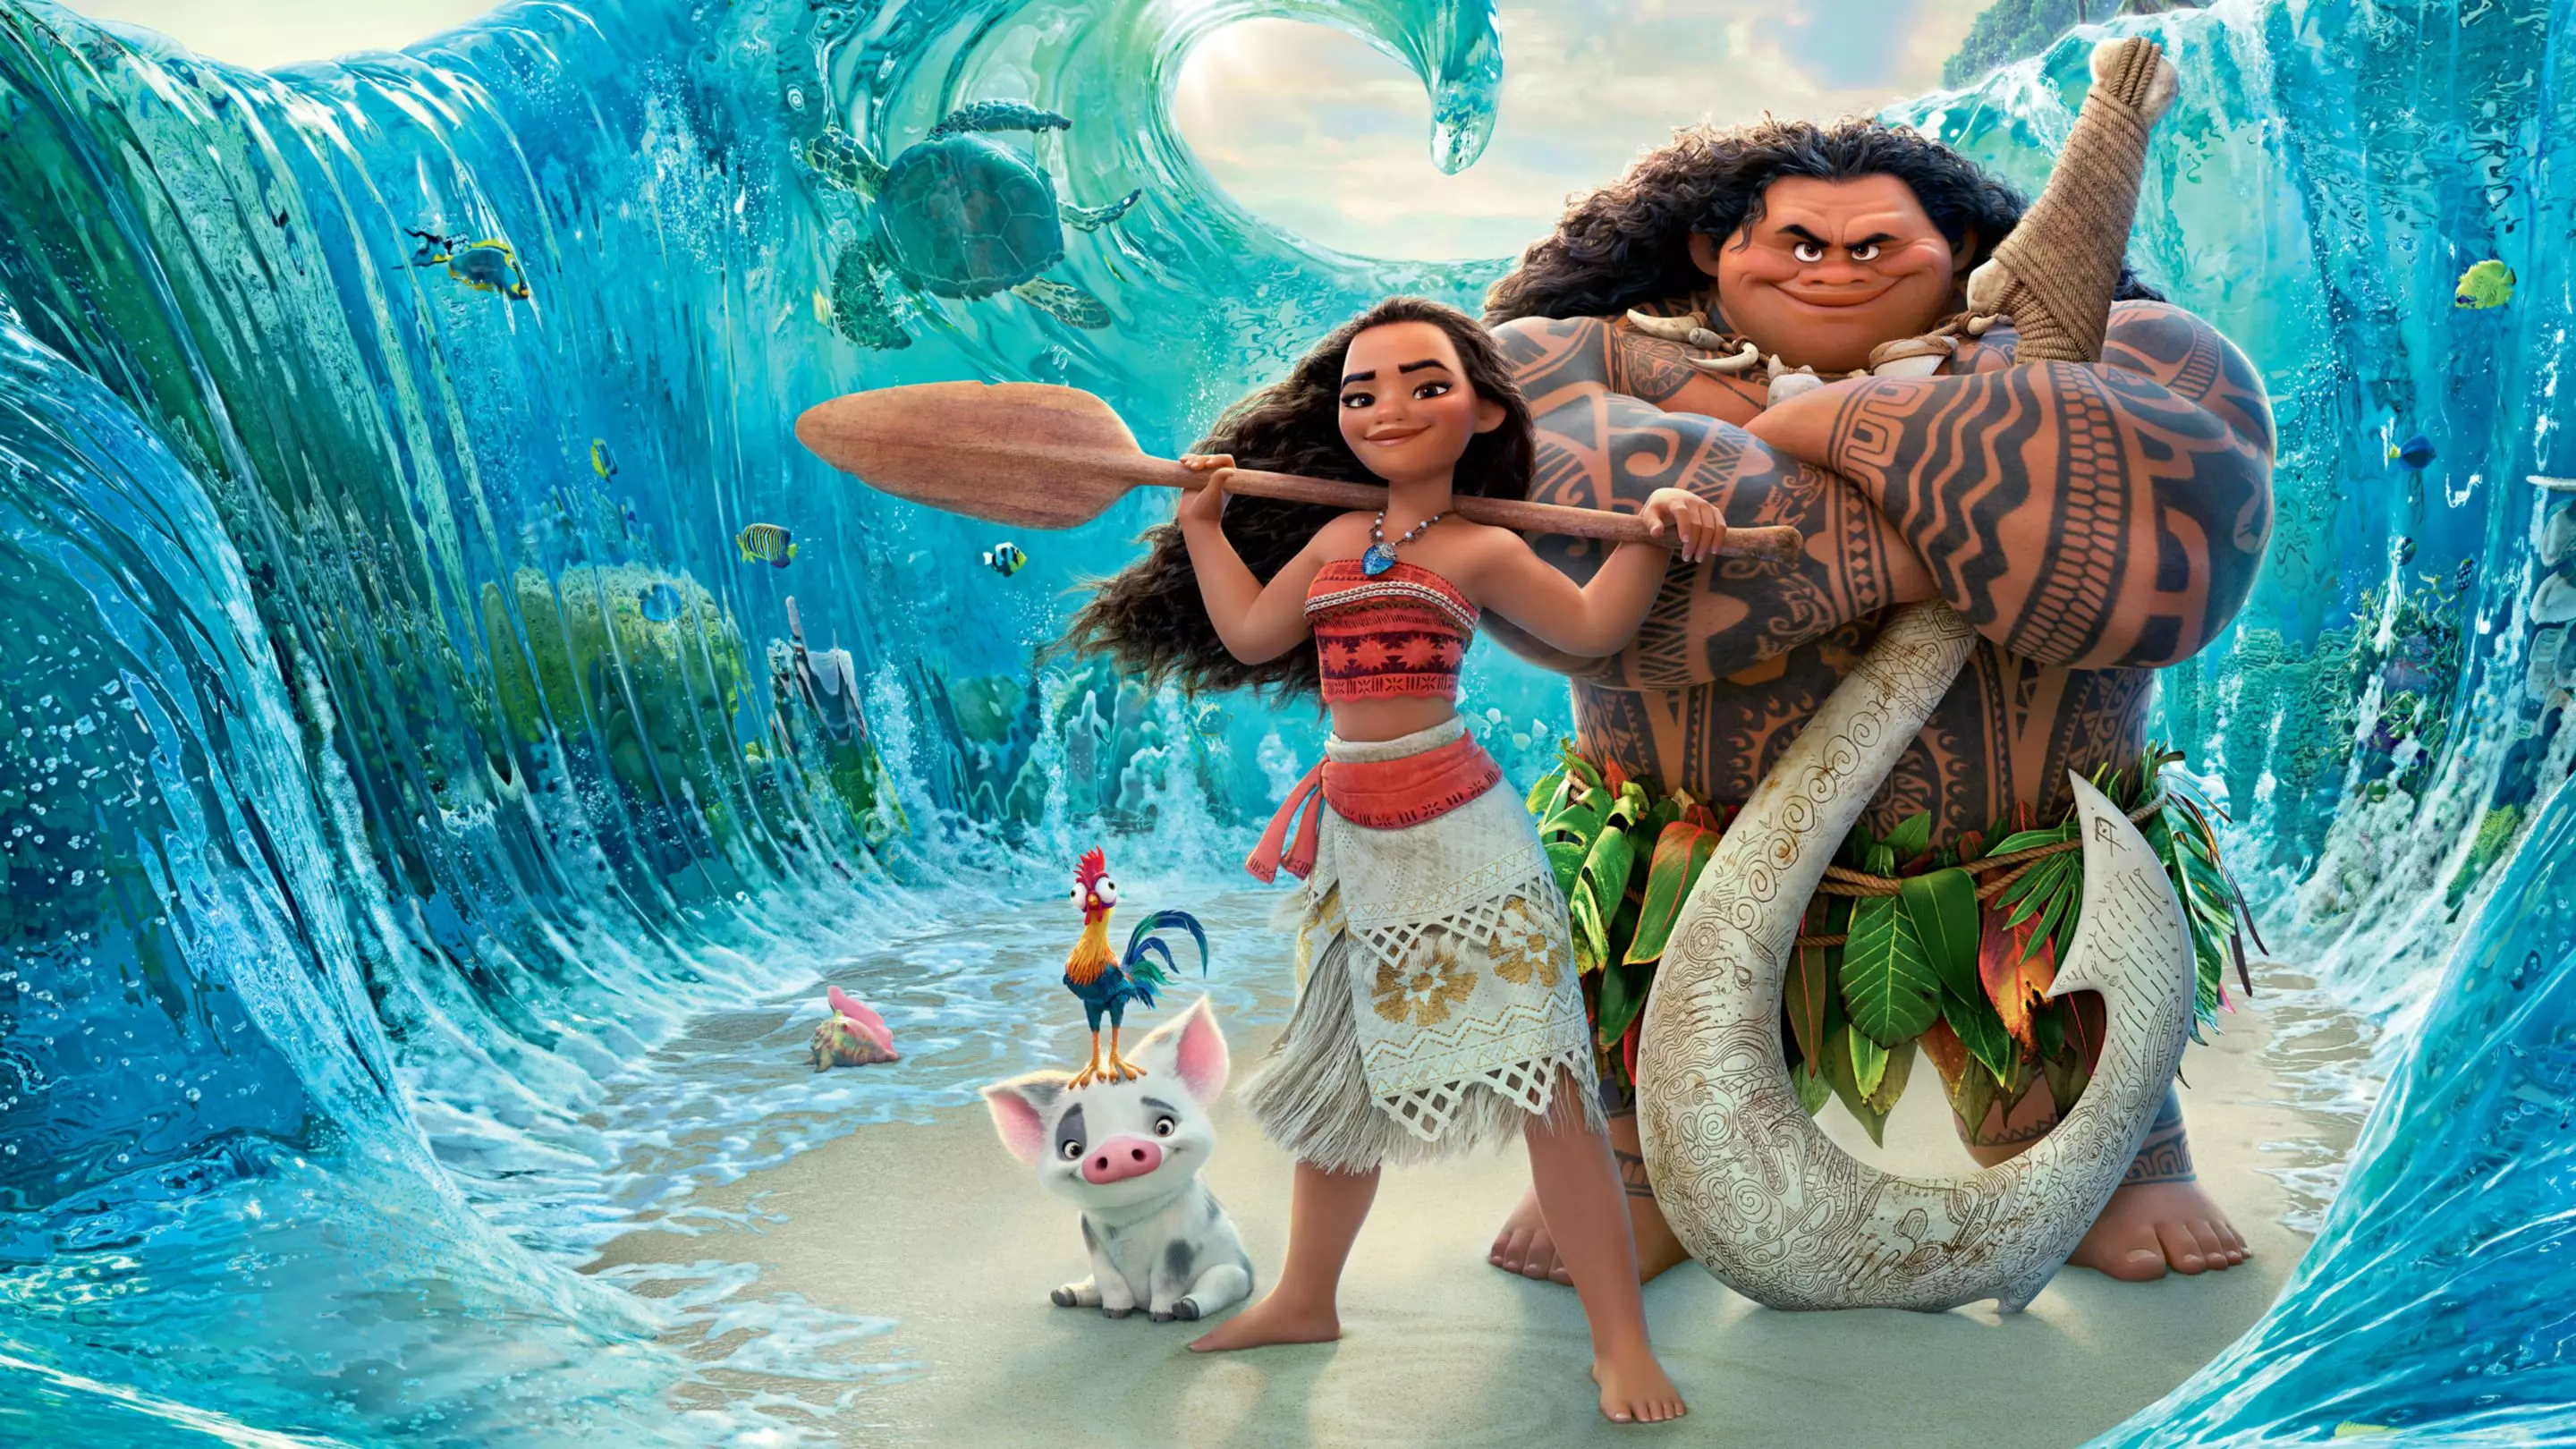 Moana: The Series will debut in 2023 (